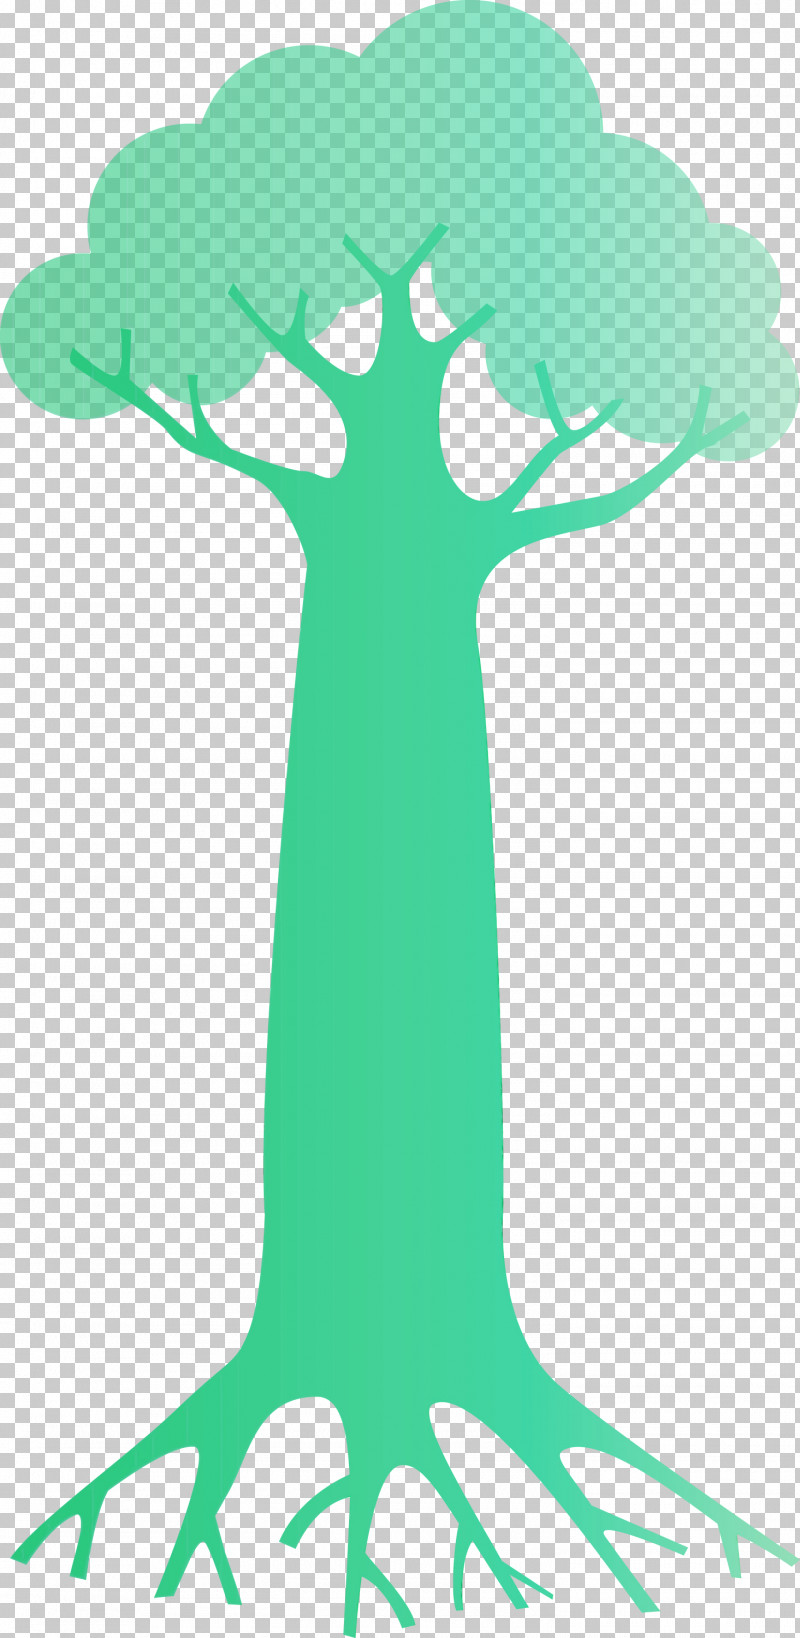 Plant Stem Cartoon Silhouette Leaf Green PNG, Clipart, Abstract Tree, Beak, Cartoon, Cartoon Tree, Character Free PNG Download